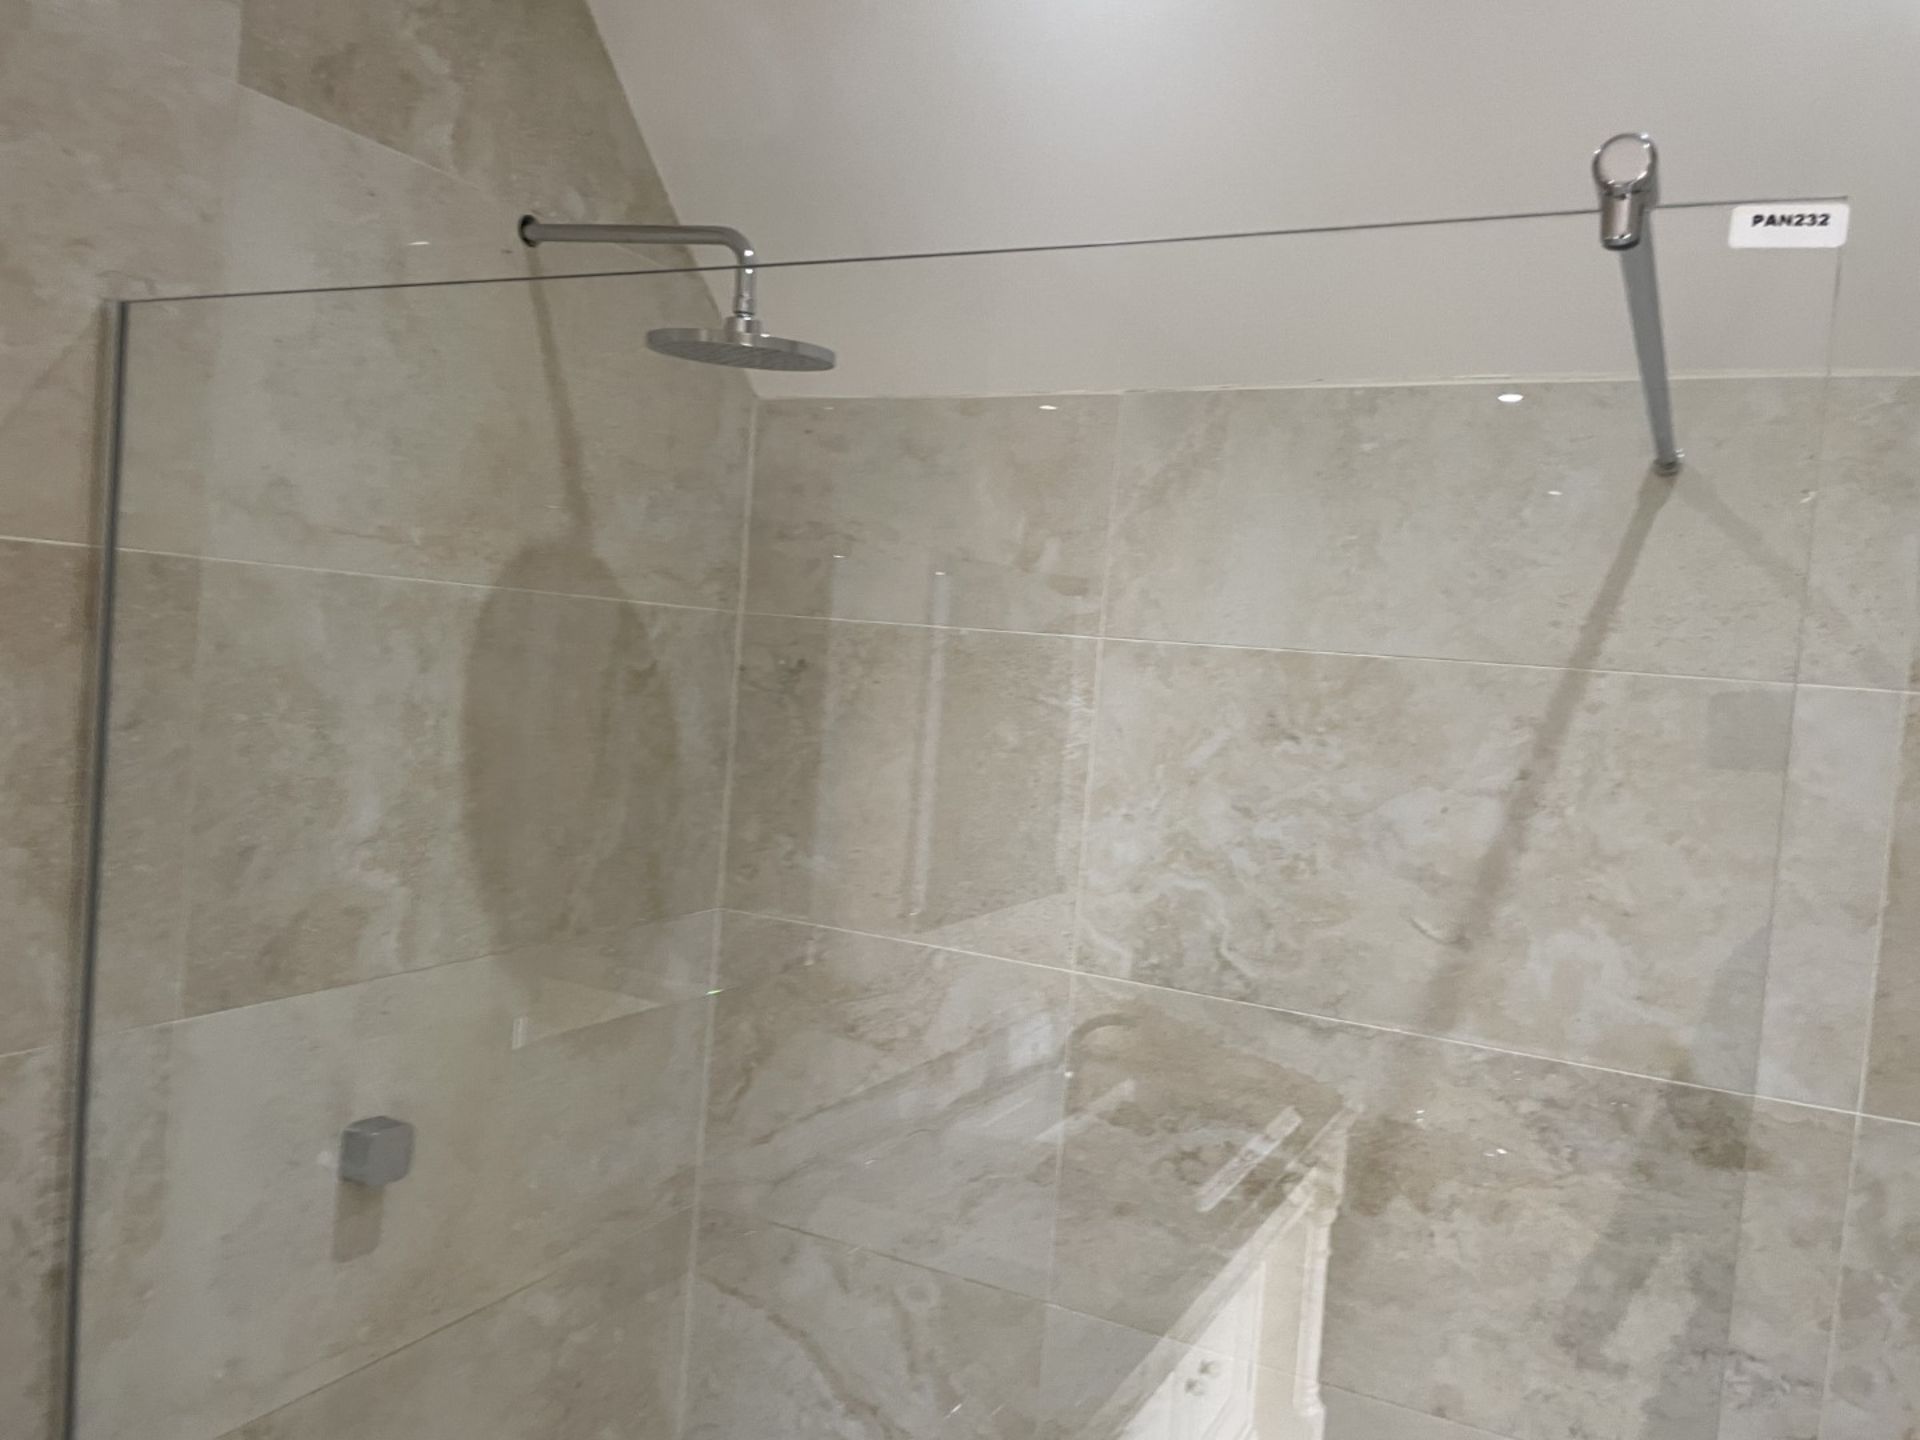 1 x Premium Shower and Enclosure + Hansgrove Controls and Thermostat - Ref: PAN232 - CL896 - NO - Image 16 of 21